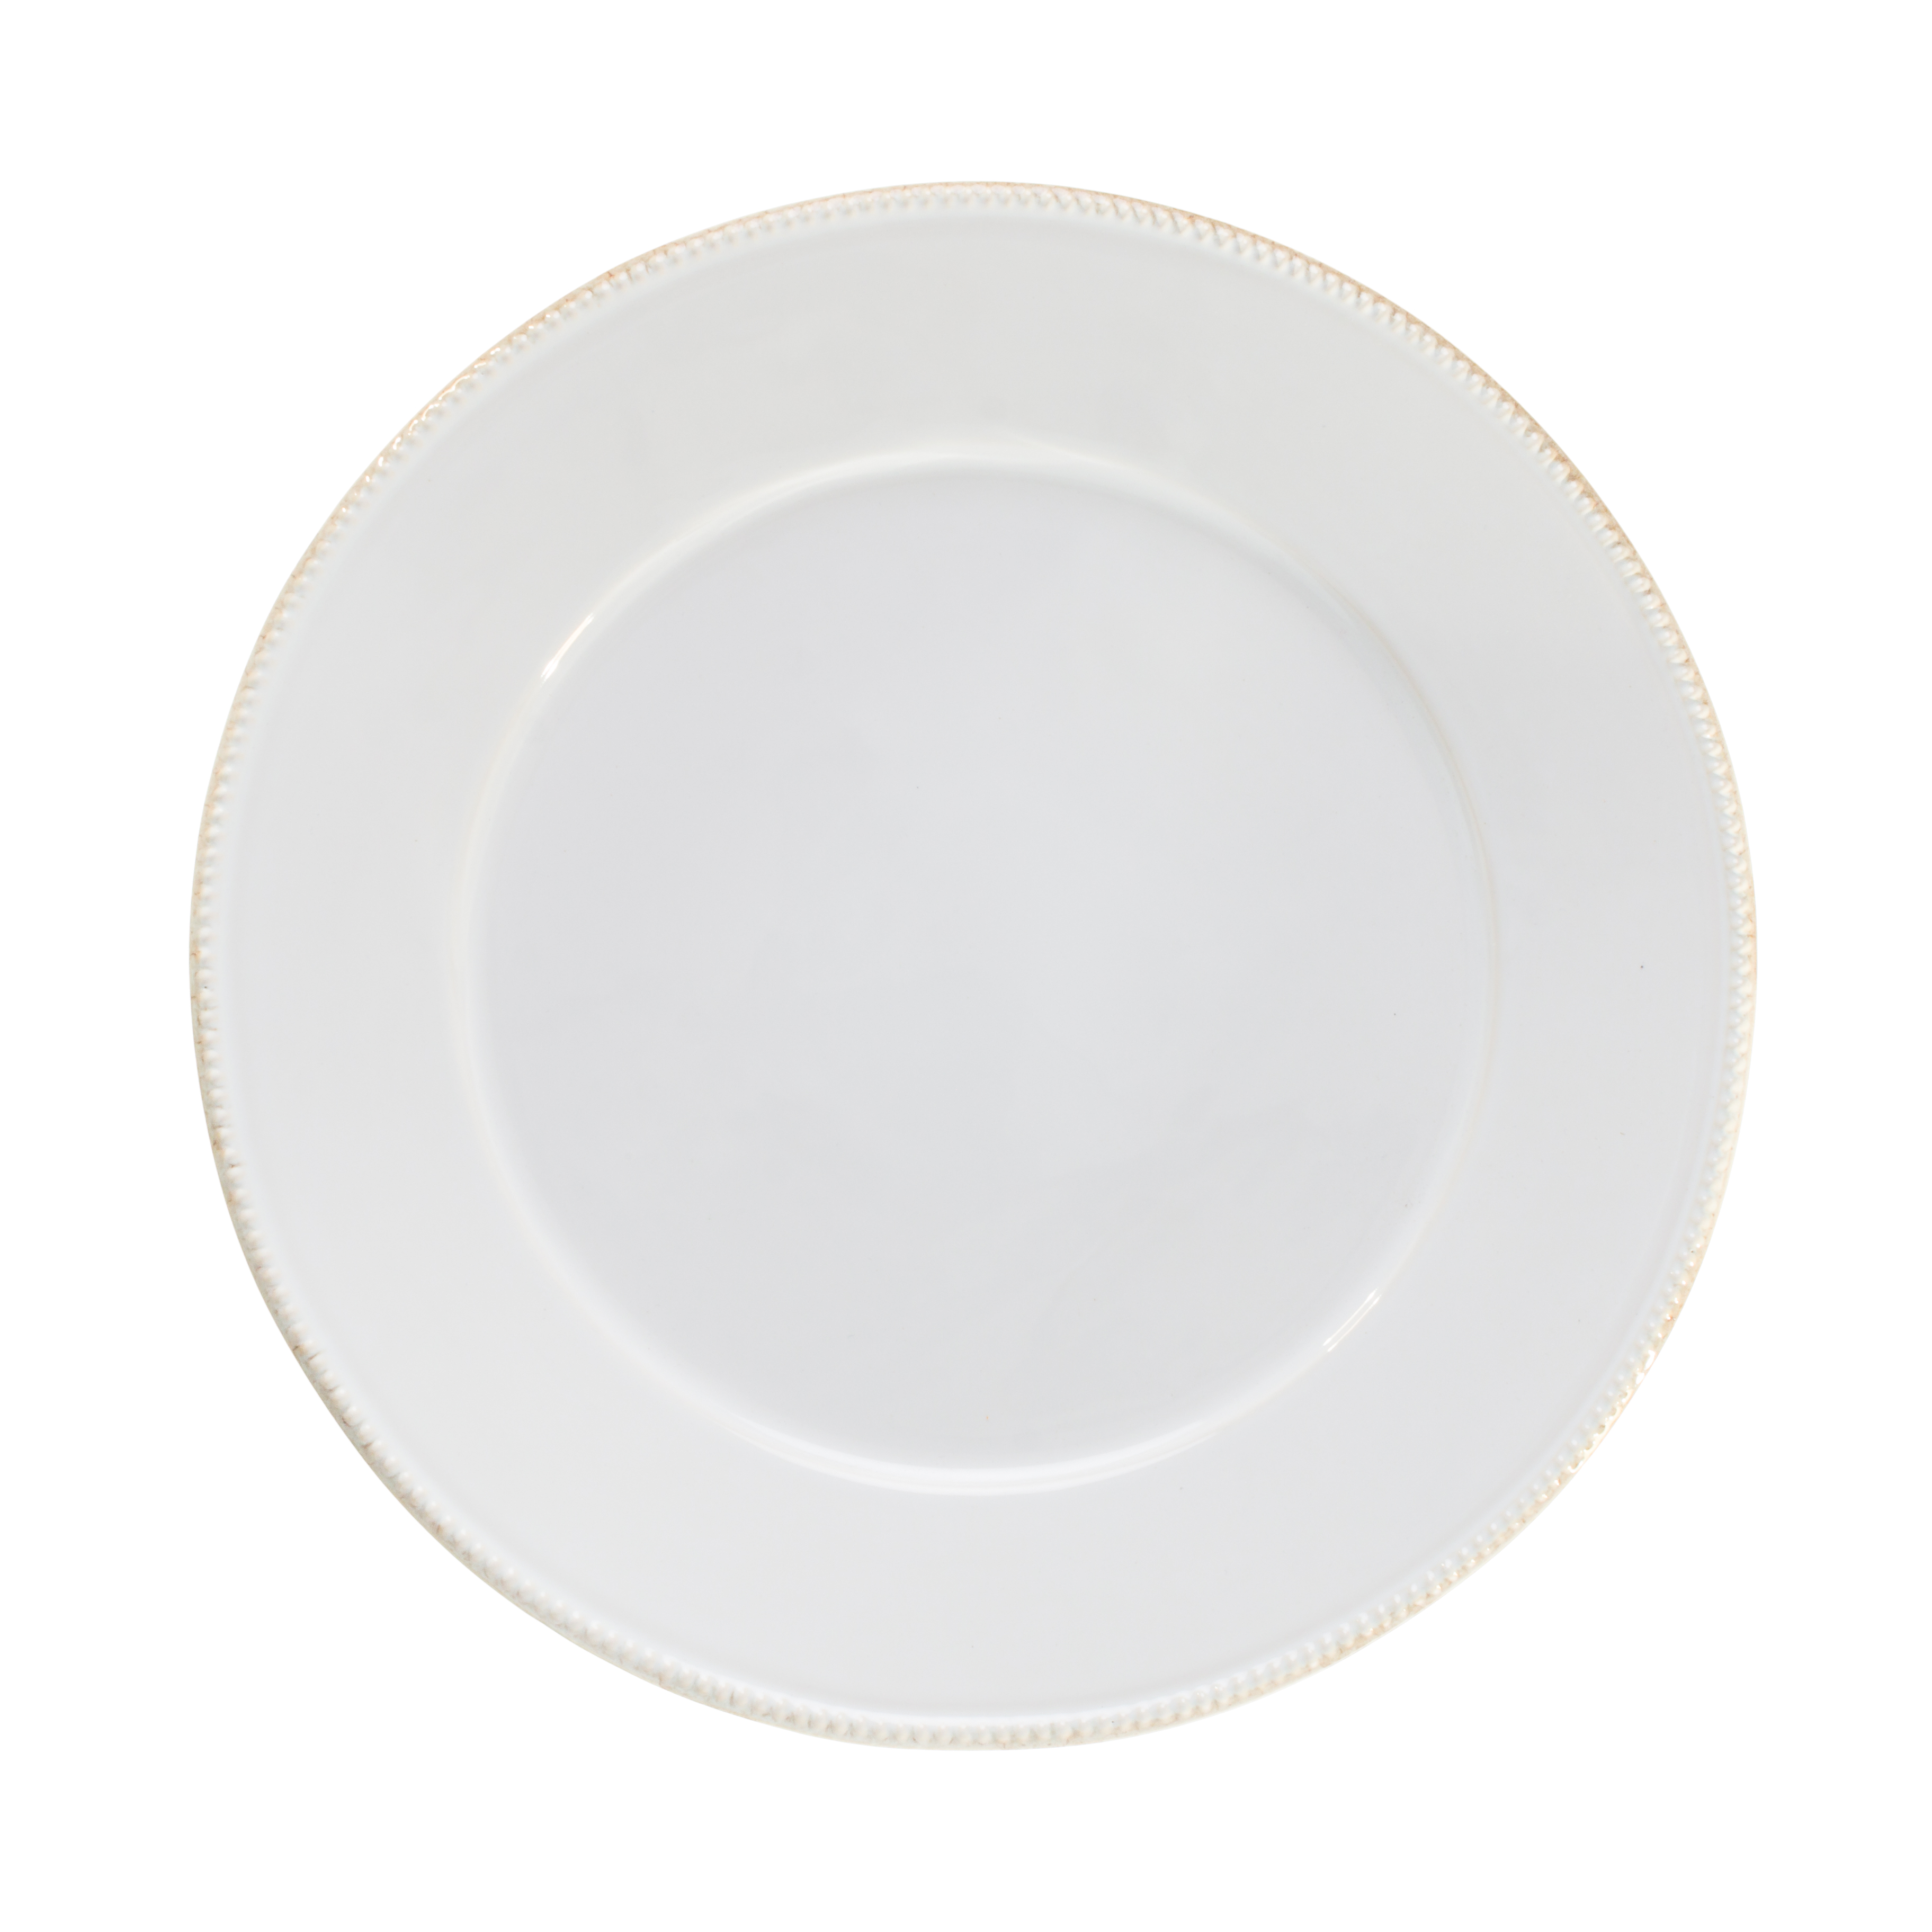 Luzia Cloud White Round Charger Plate/platter Gift